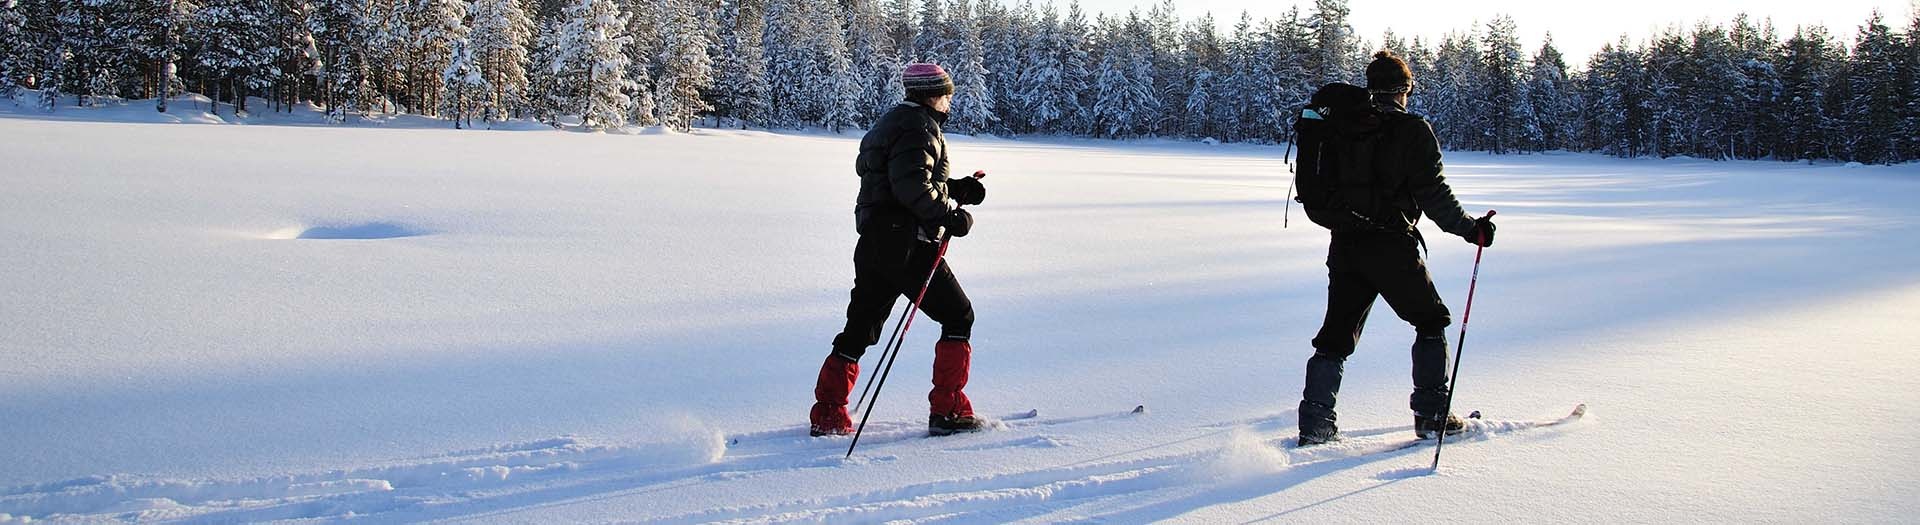 Back country skiing along the Russian border